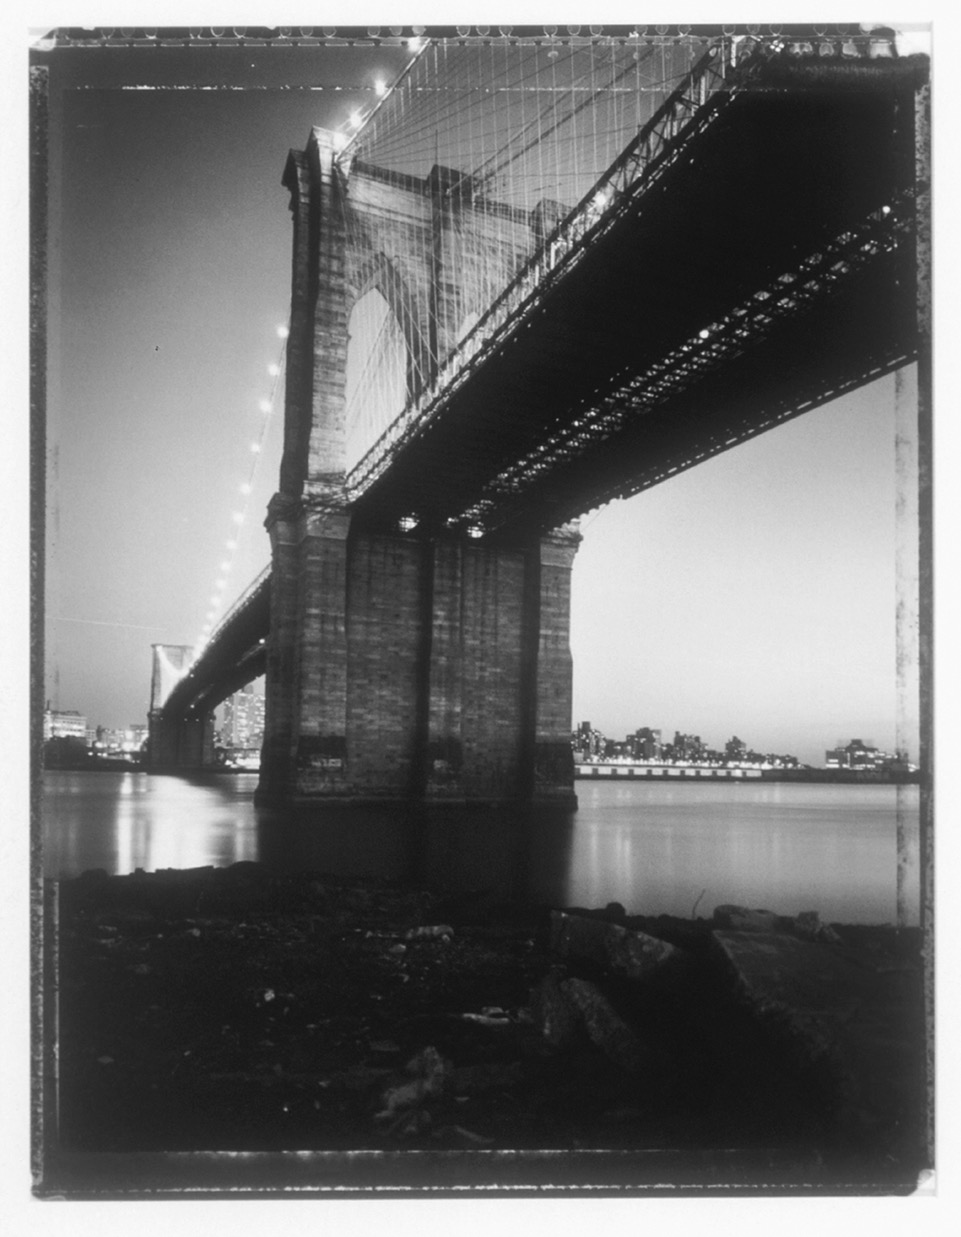 A black and white photo of the Brooklyn Bridge from below.